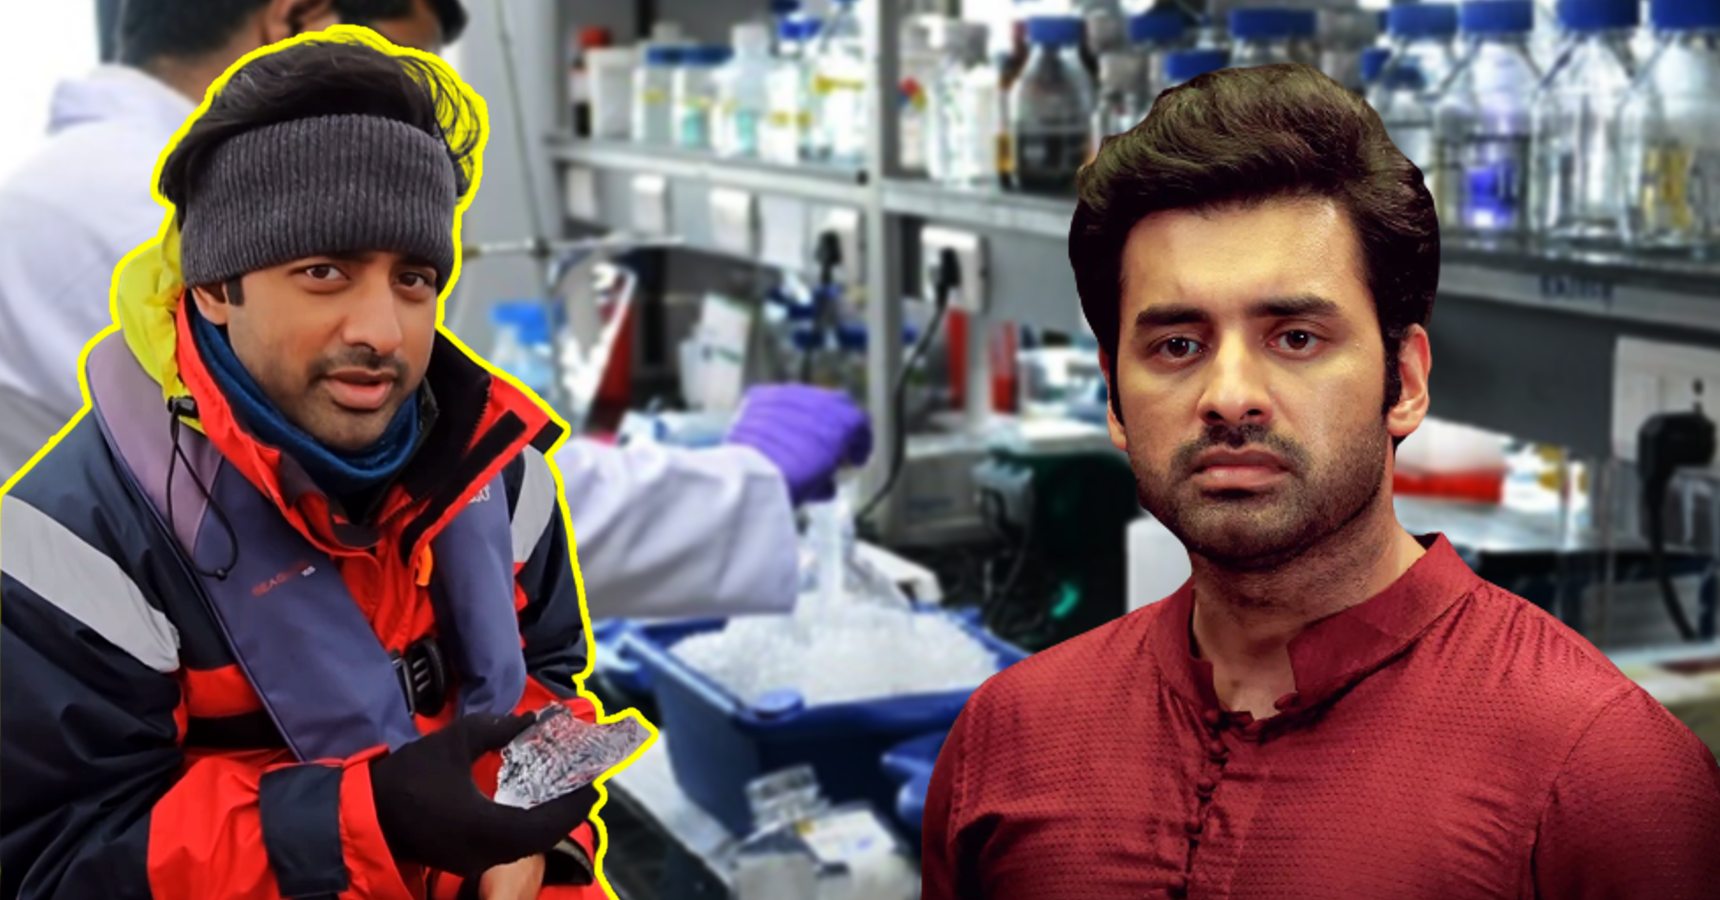 Ankush Hazra wants to be a Scientist video goes viral